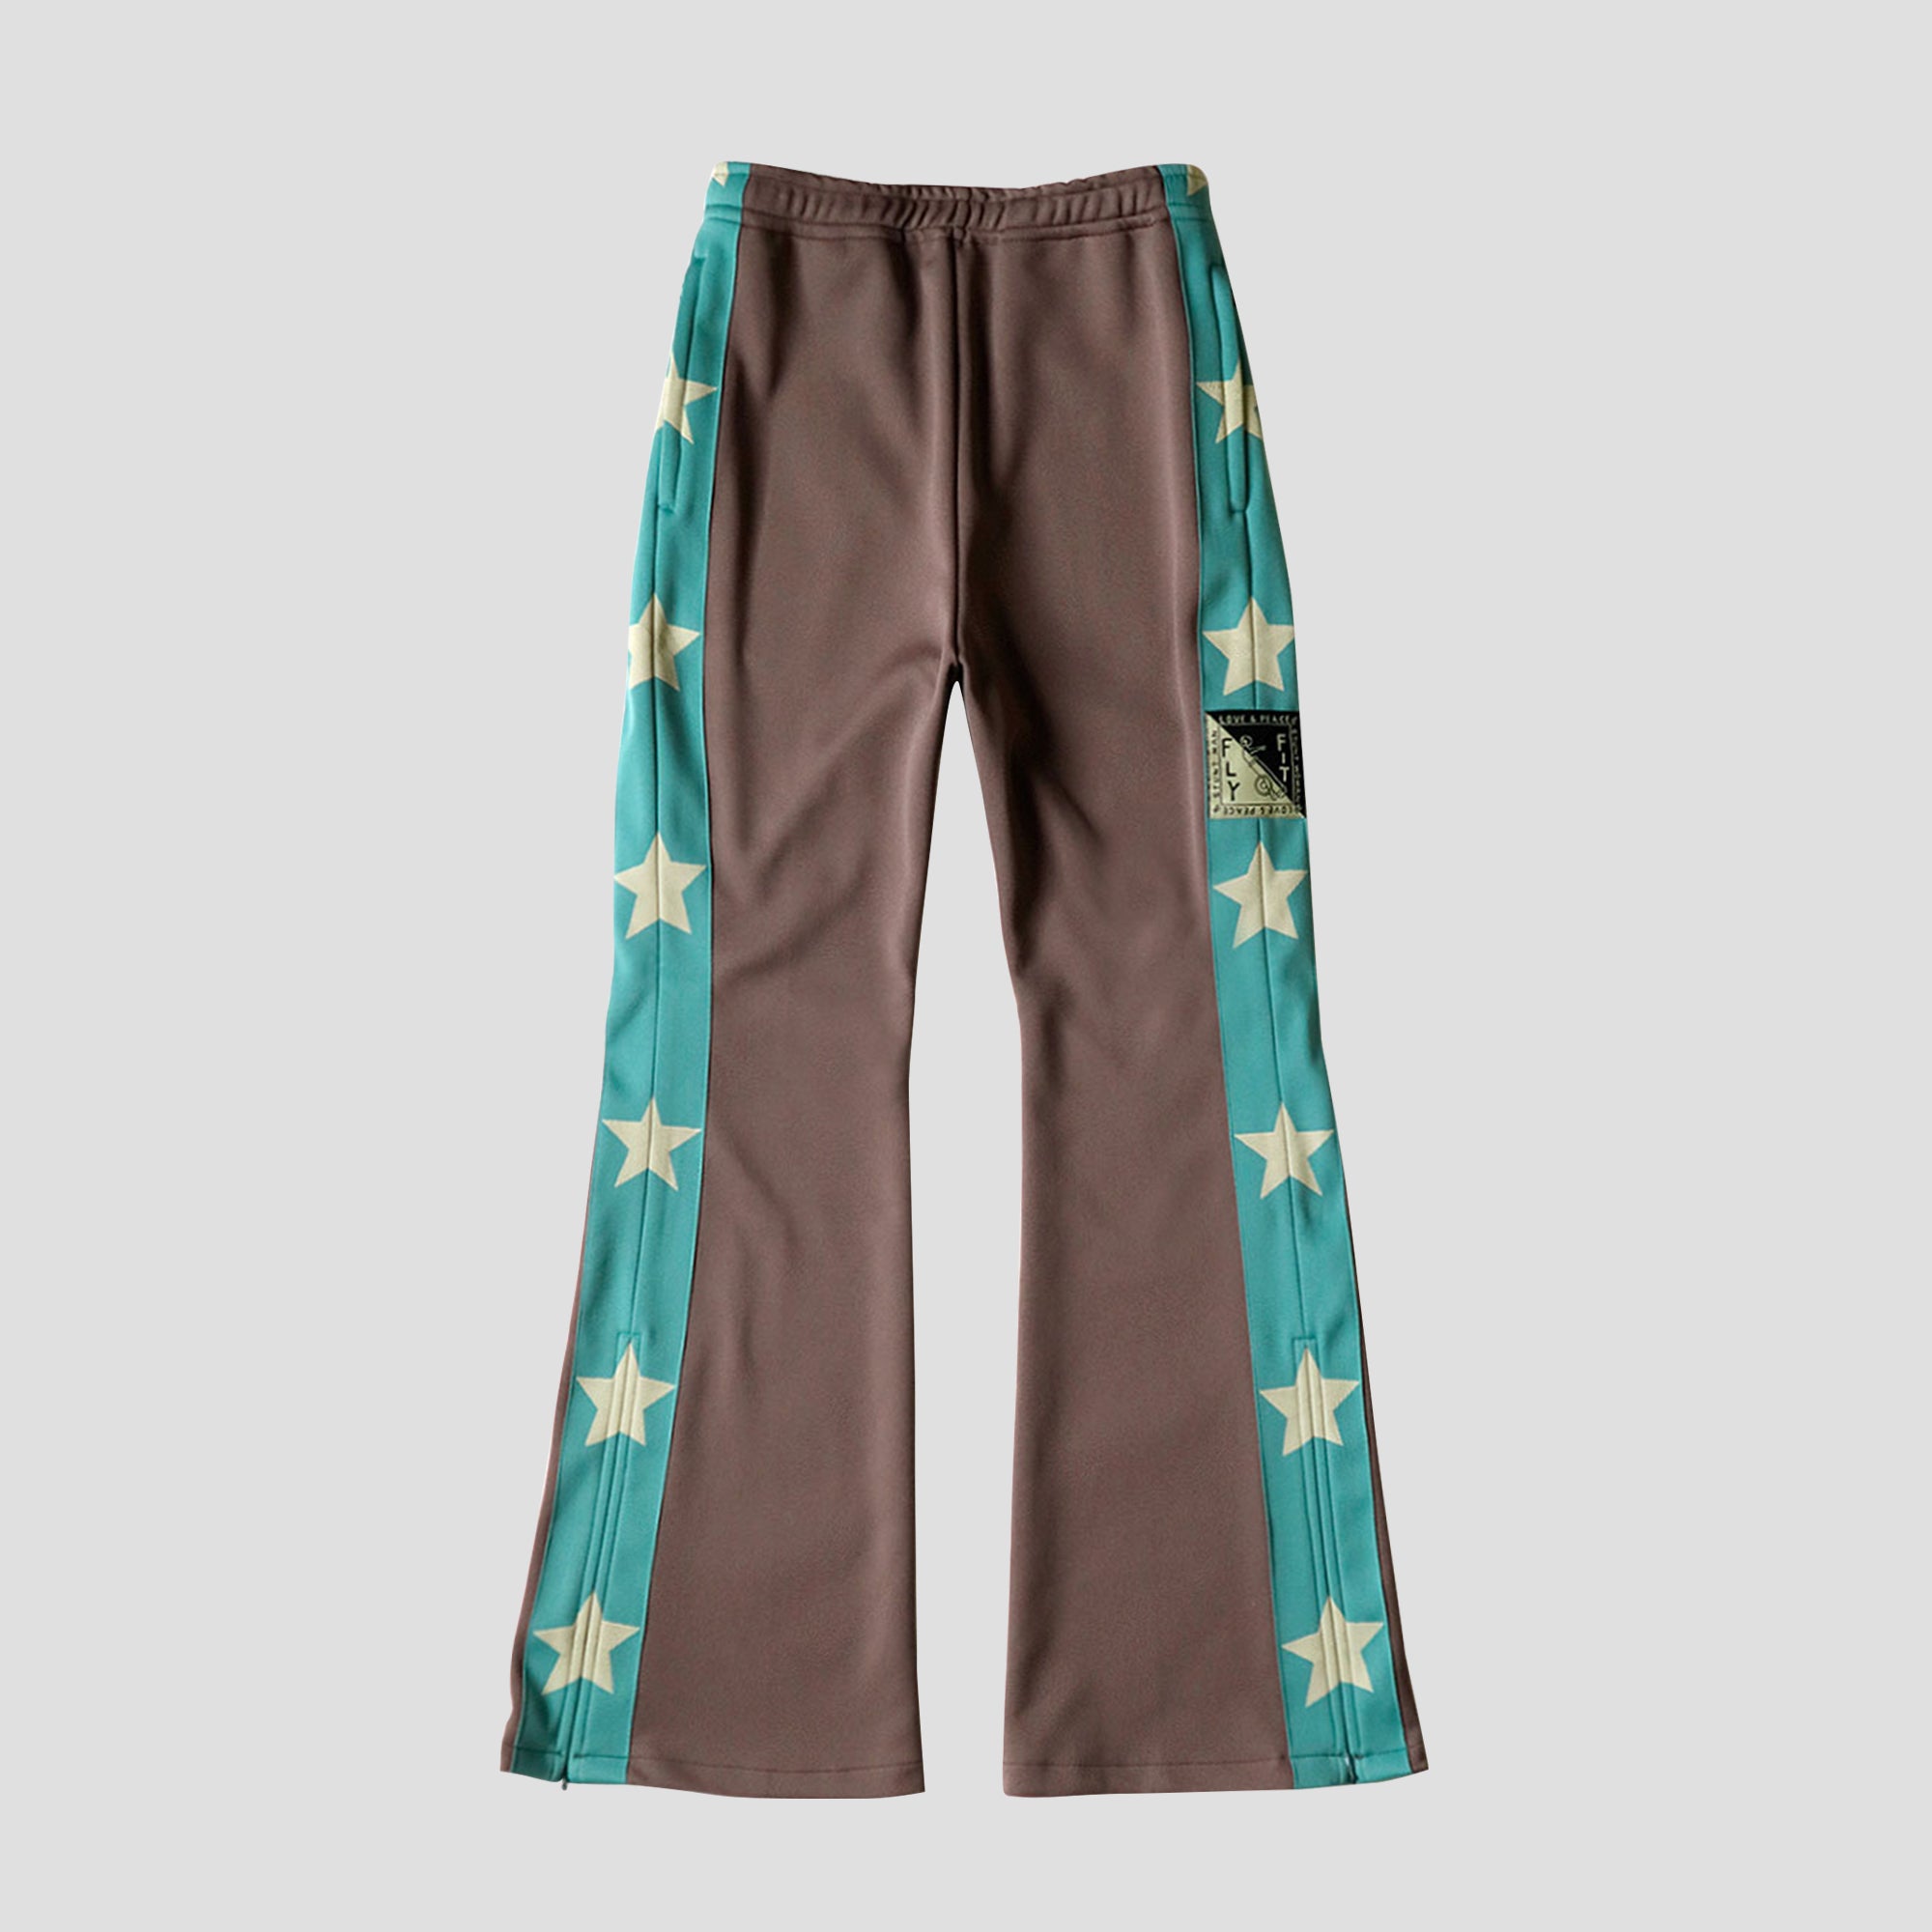 JERSEY FLARE TRACK PANTS - BROWN